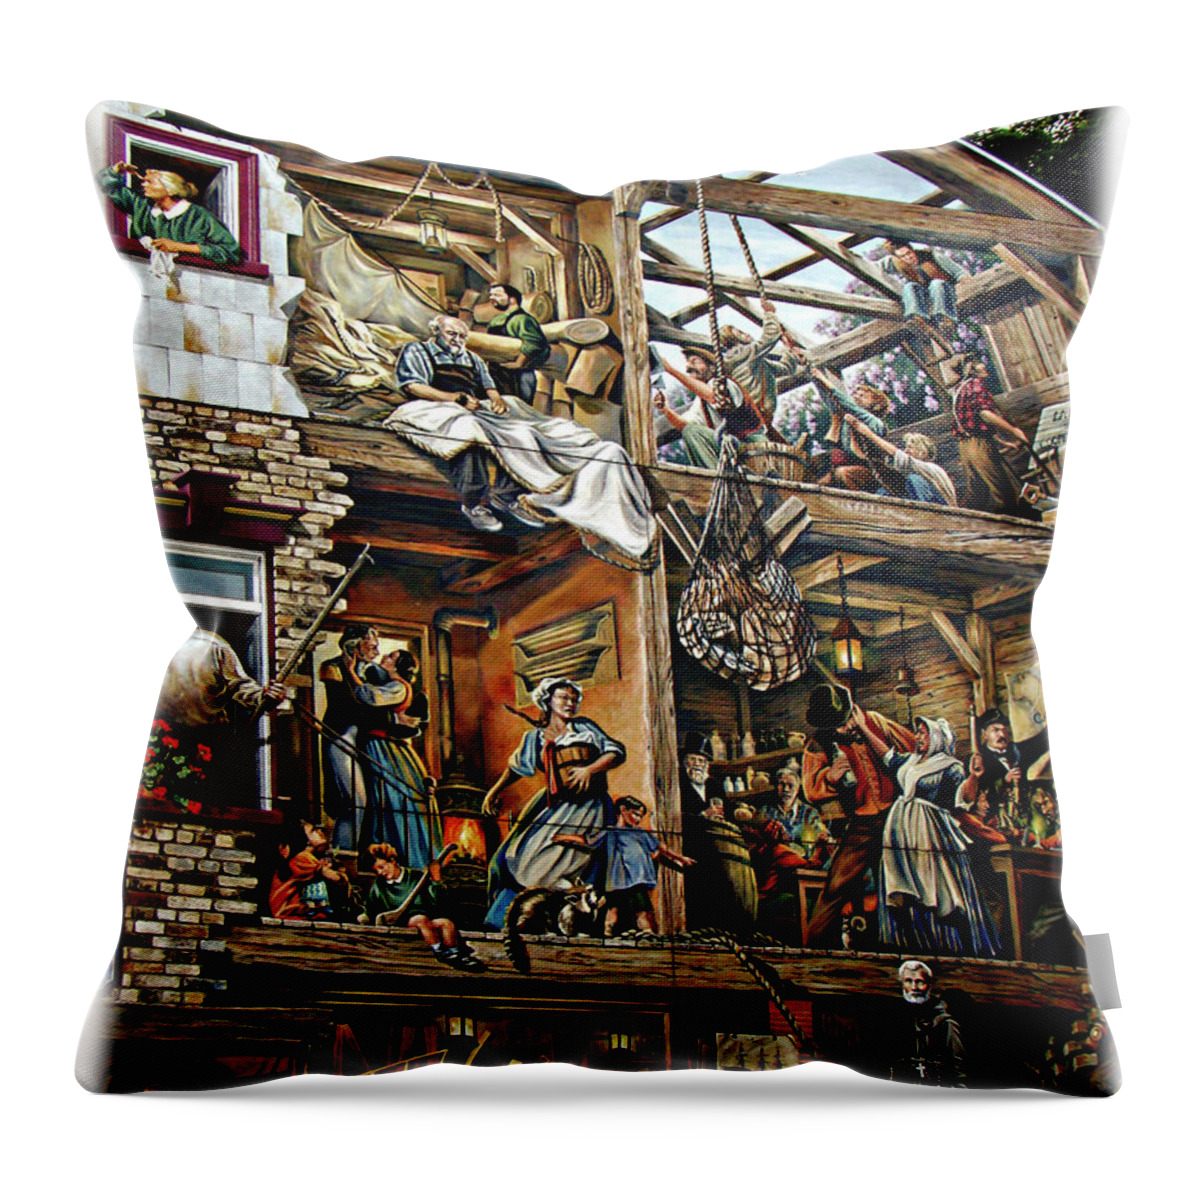 Quebec Throw Pillow featuring the photograph Quebec City Historical Mural by Al Bourassa